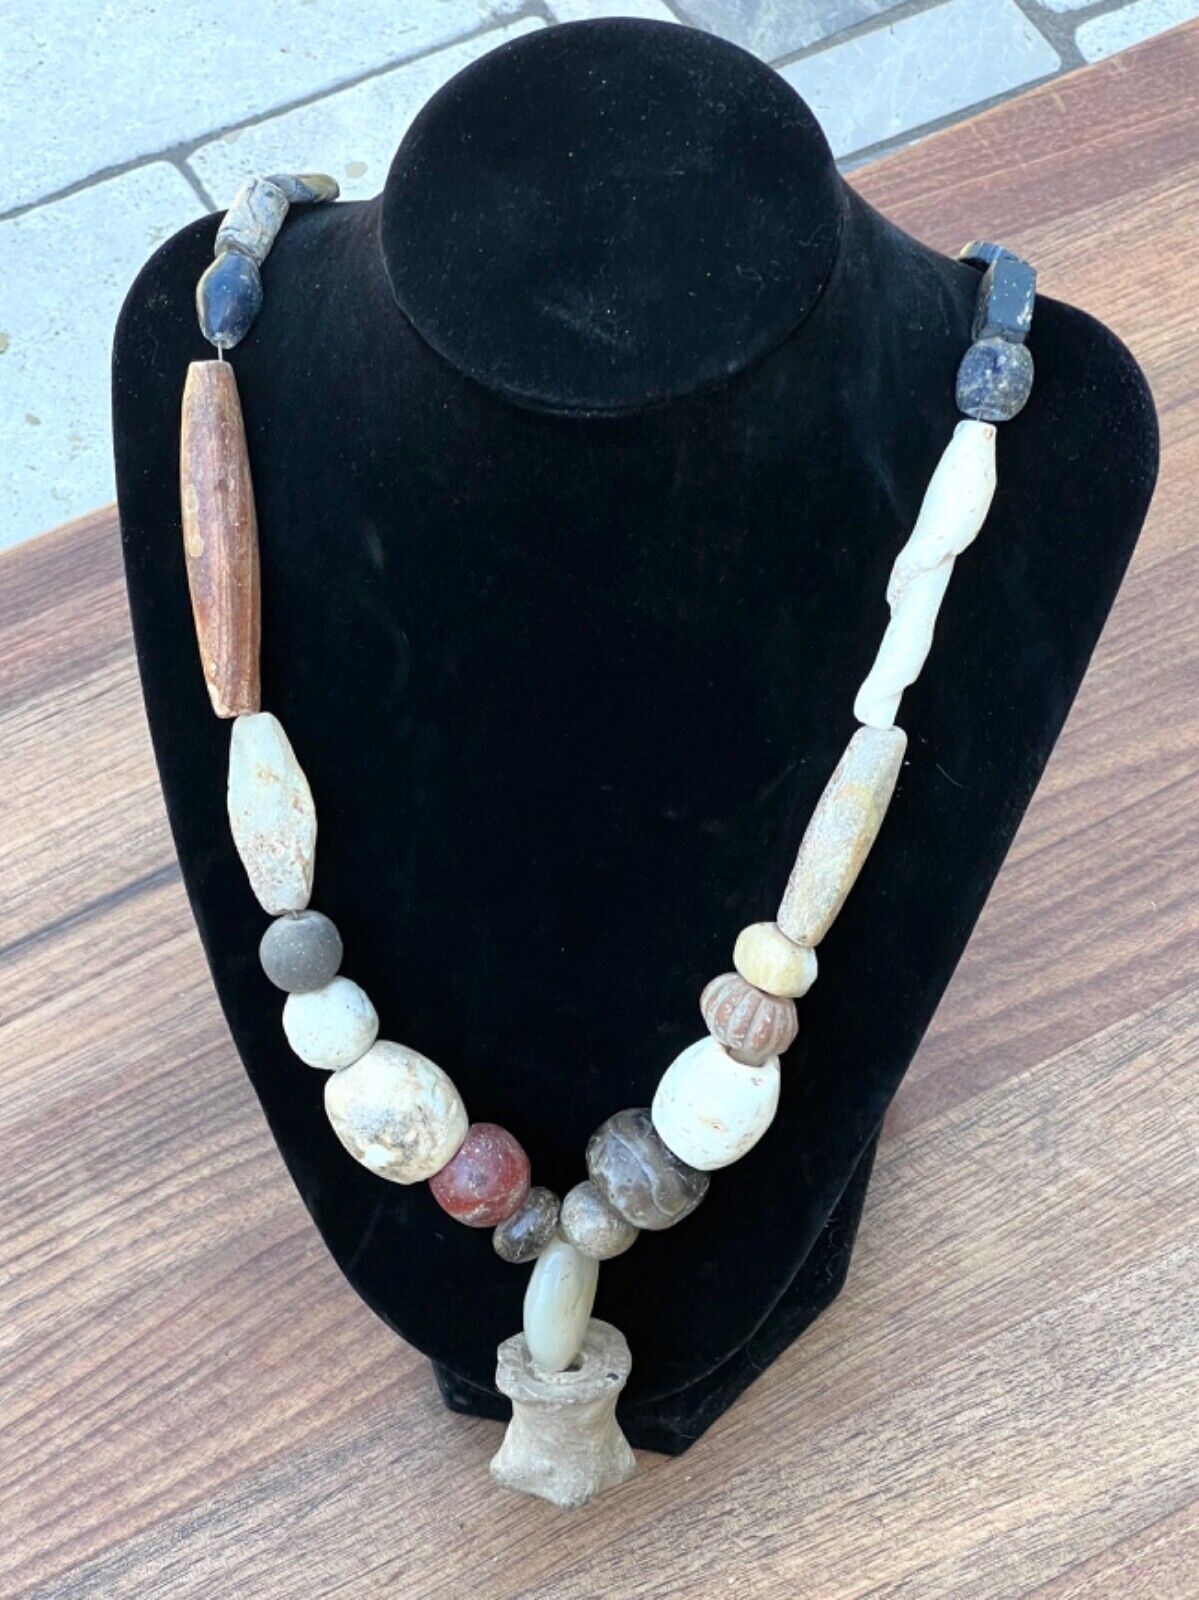 Ancient Glass, Stone and Ceramic Bead Necklace - Wearable